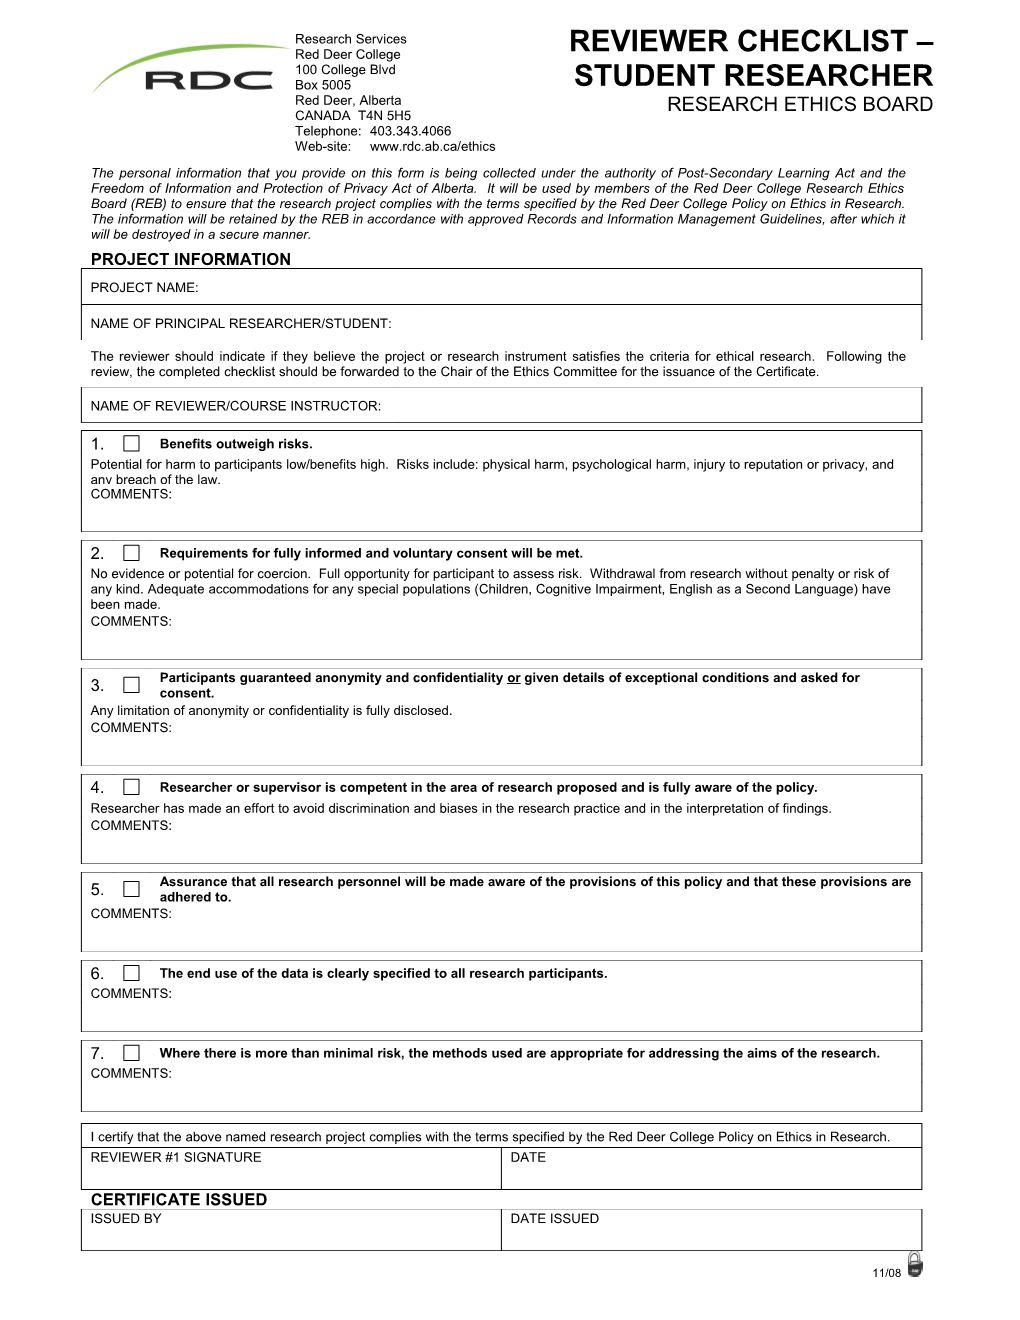 Reviewer Checklist - Student Researcher - Research Ethics Board